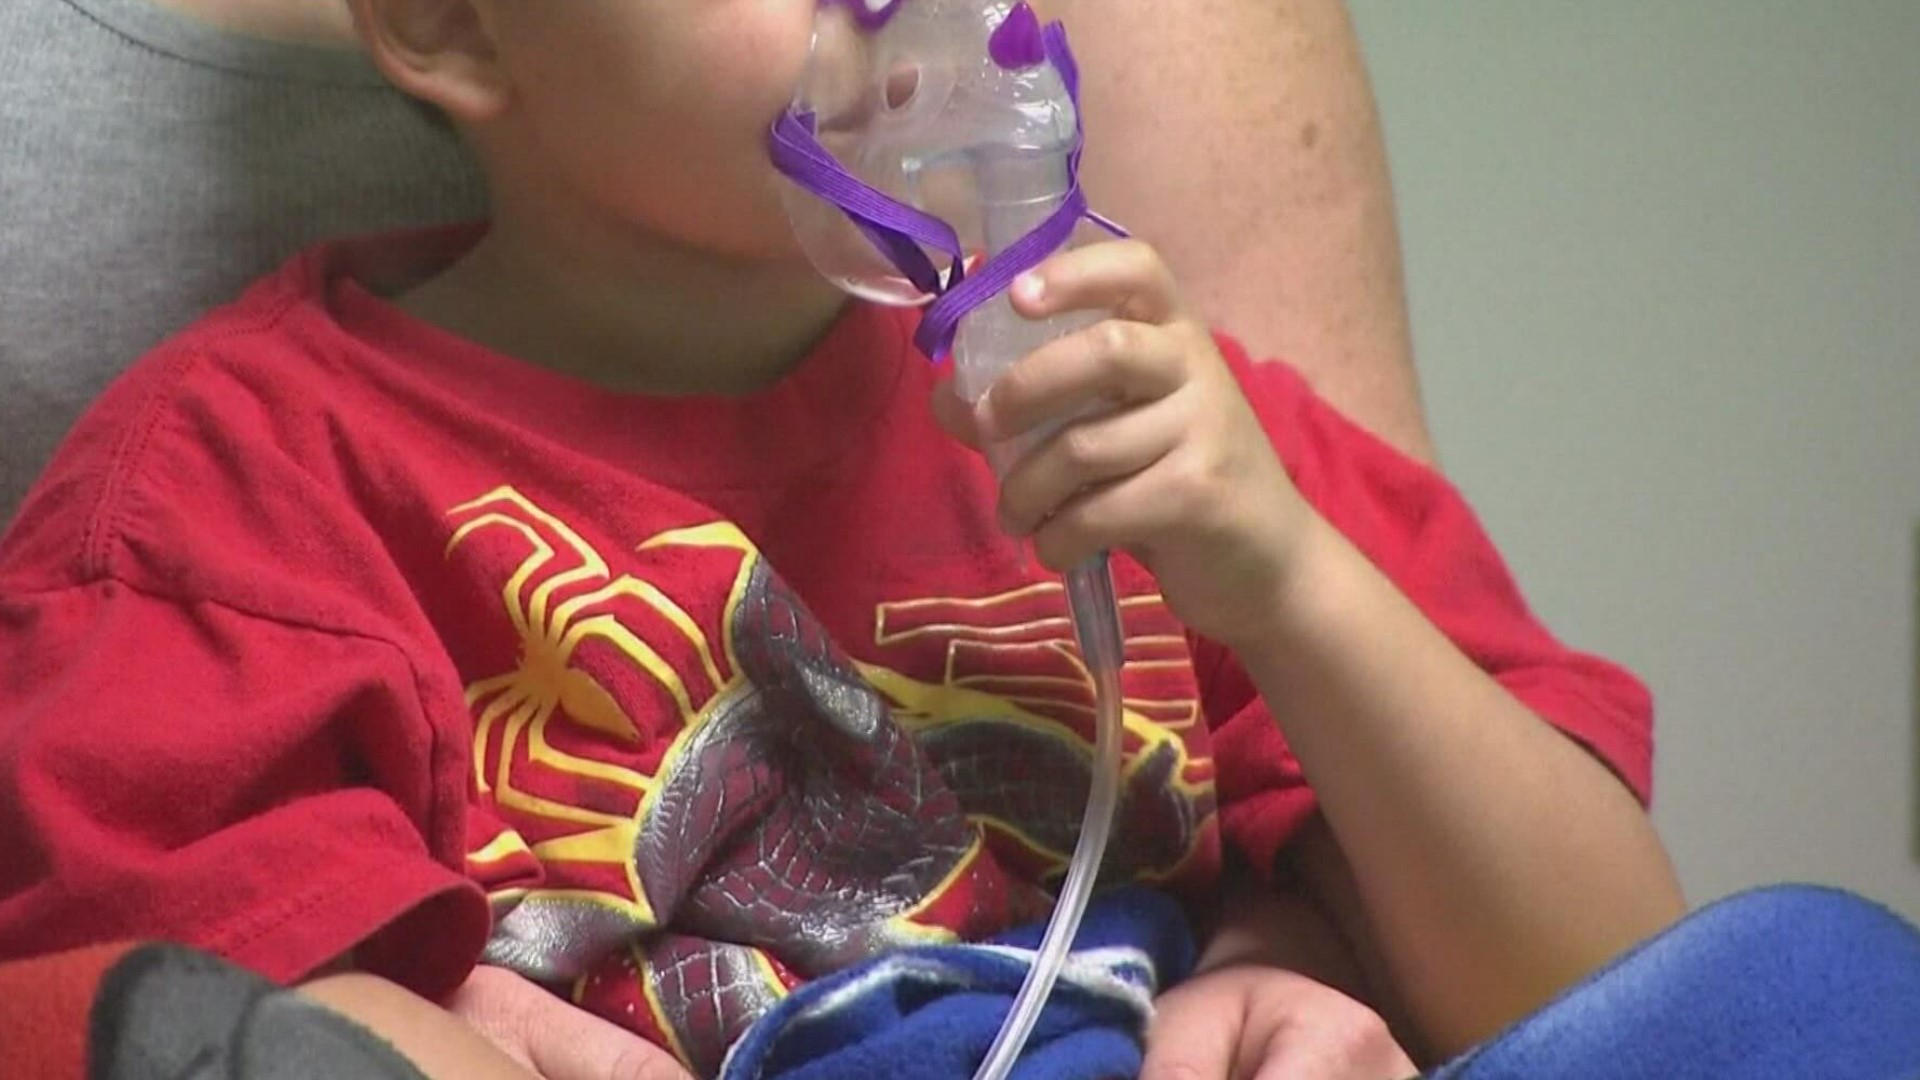 Children's Minnesota says about two-thirds of the respiratory activity they're seeing right now is related to RSV. On average, symptoms last five to seven days.